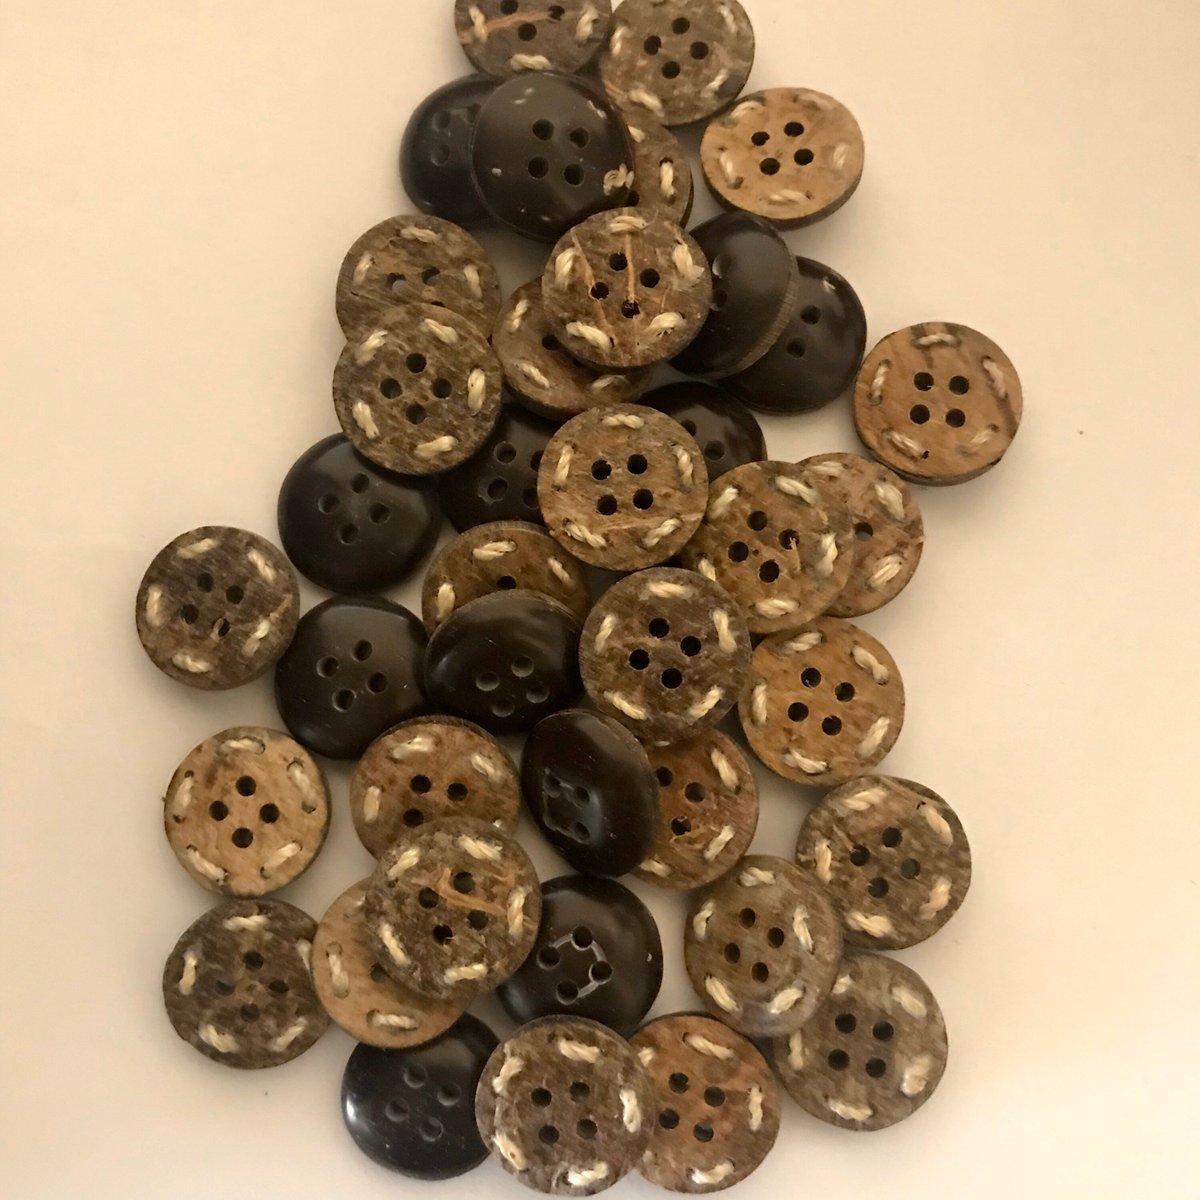 120 Vintage 18mm small round 4 holes wood buttons with twine details Lot of 140 by BySupply. tuppu.net/a7d6b6f5 #Etsy #bysupply #Destash